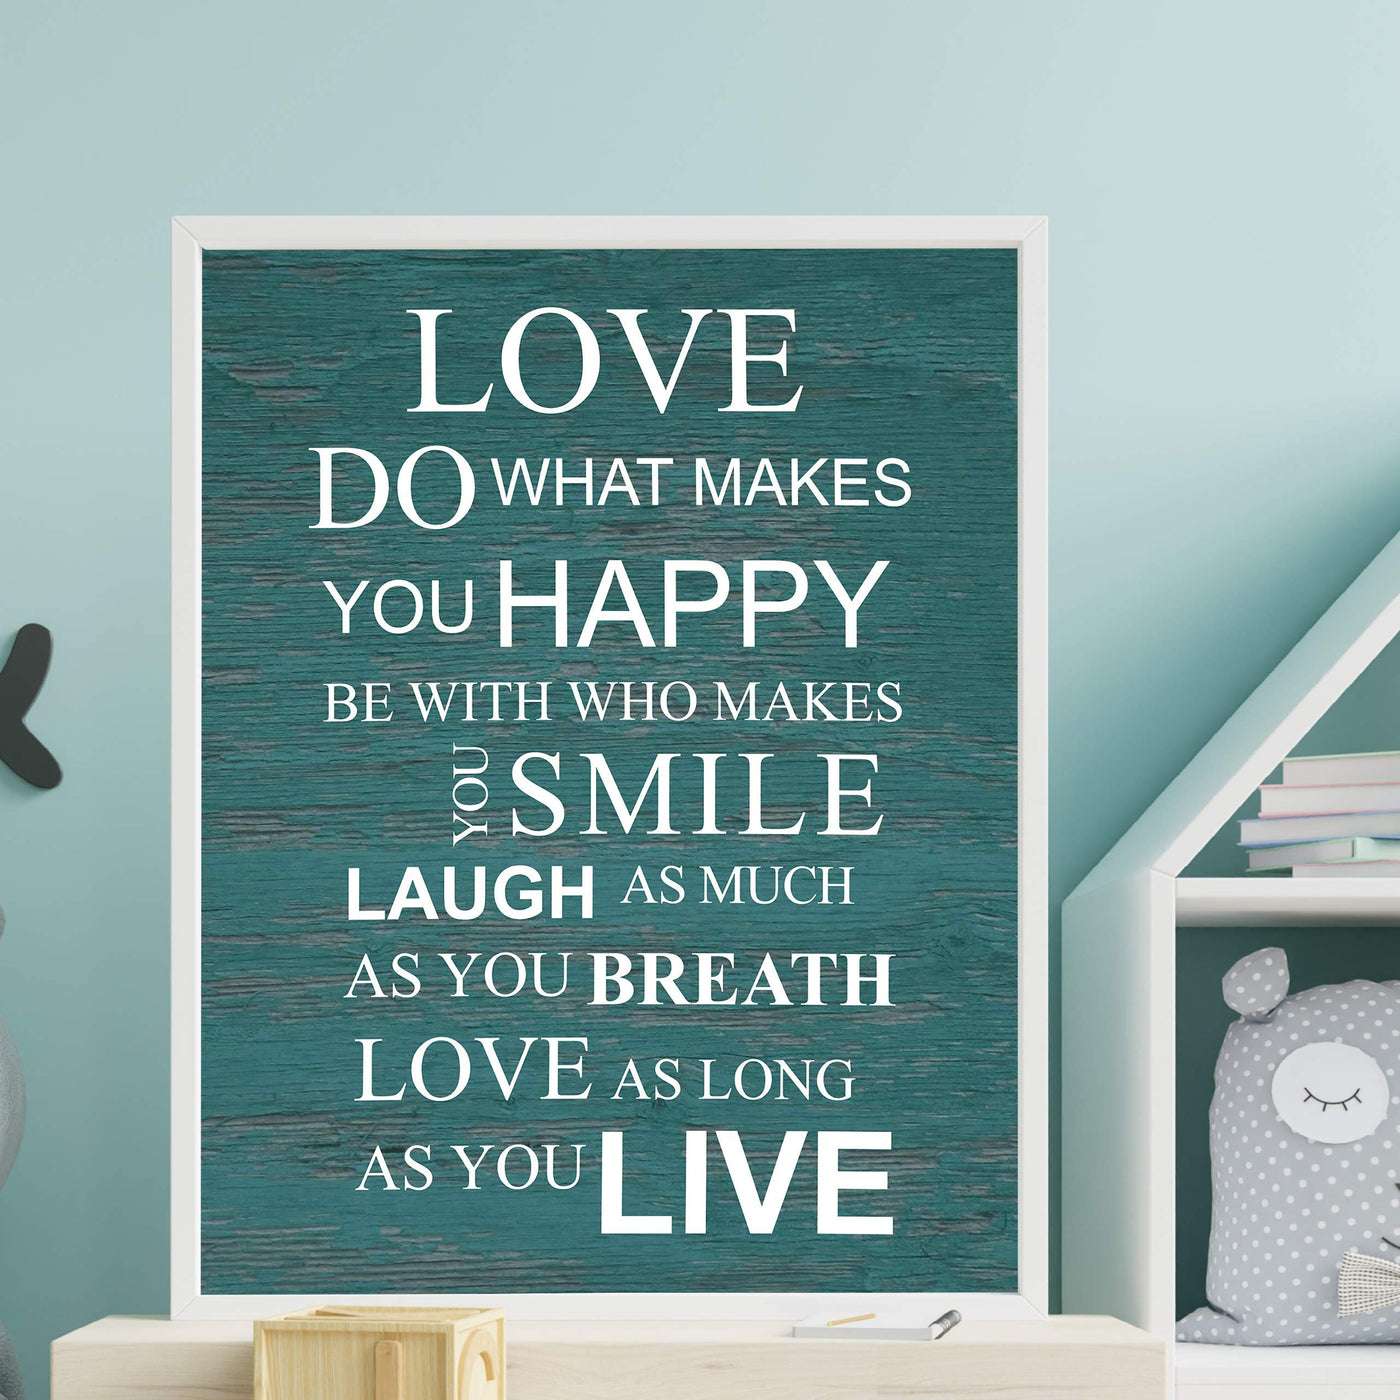 Love-Do What Makes You Happy Motivational Quotes Wall Art Sign - 11 x 14" Inspirational Poster Print-Ready to Frame. Home-Office-School-Dorm Decor. Great Reminders for All! Printed on Paper.